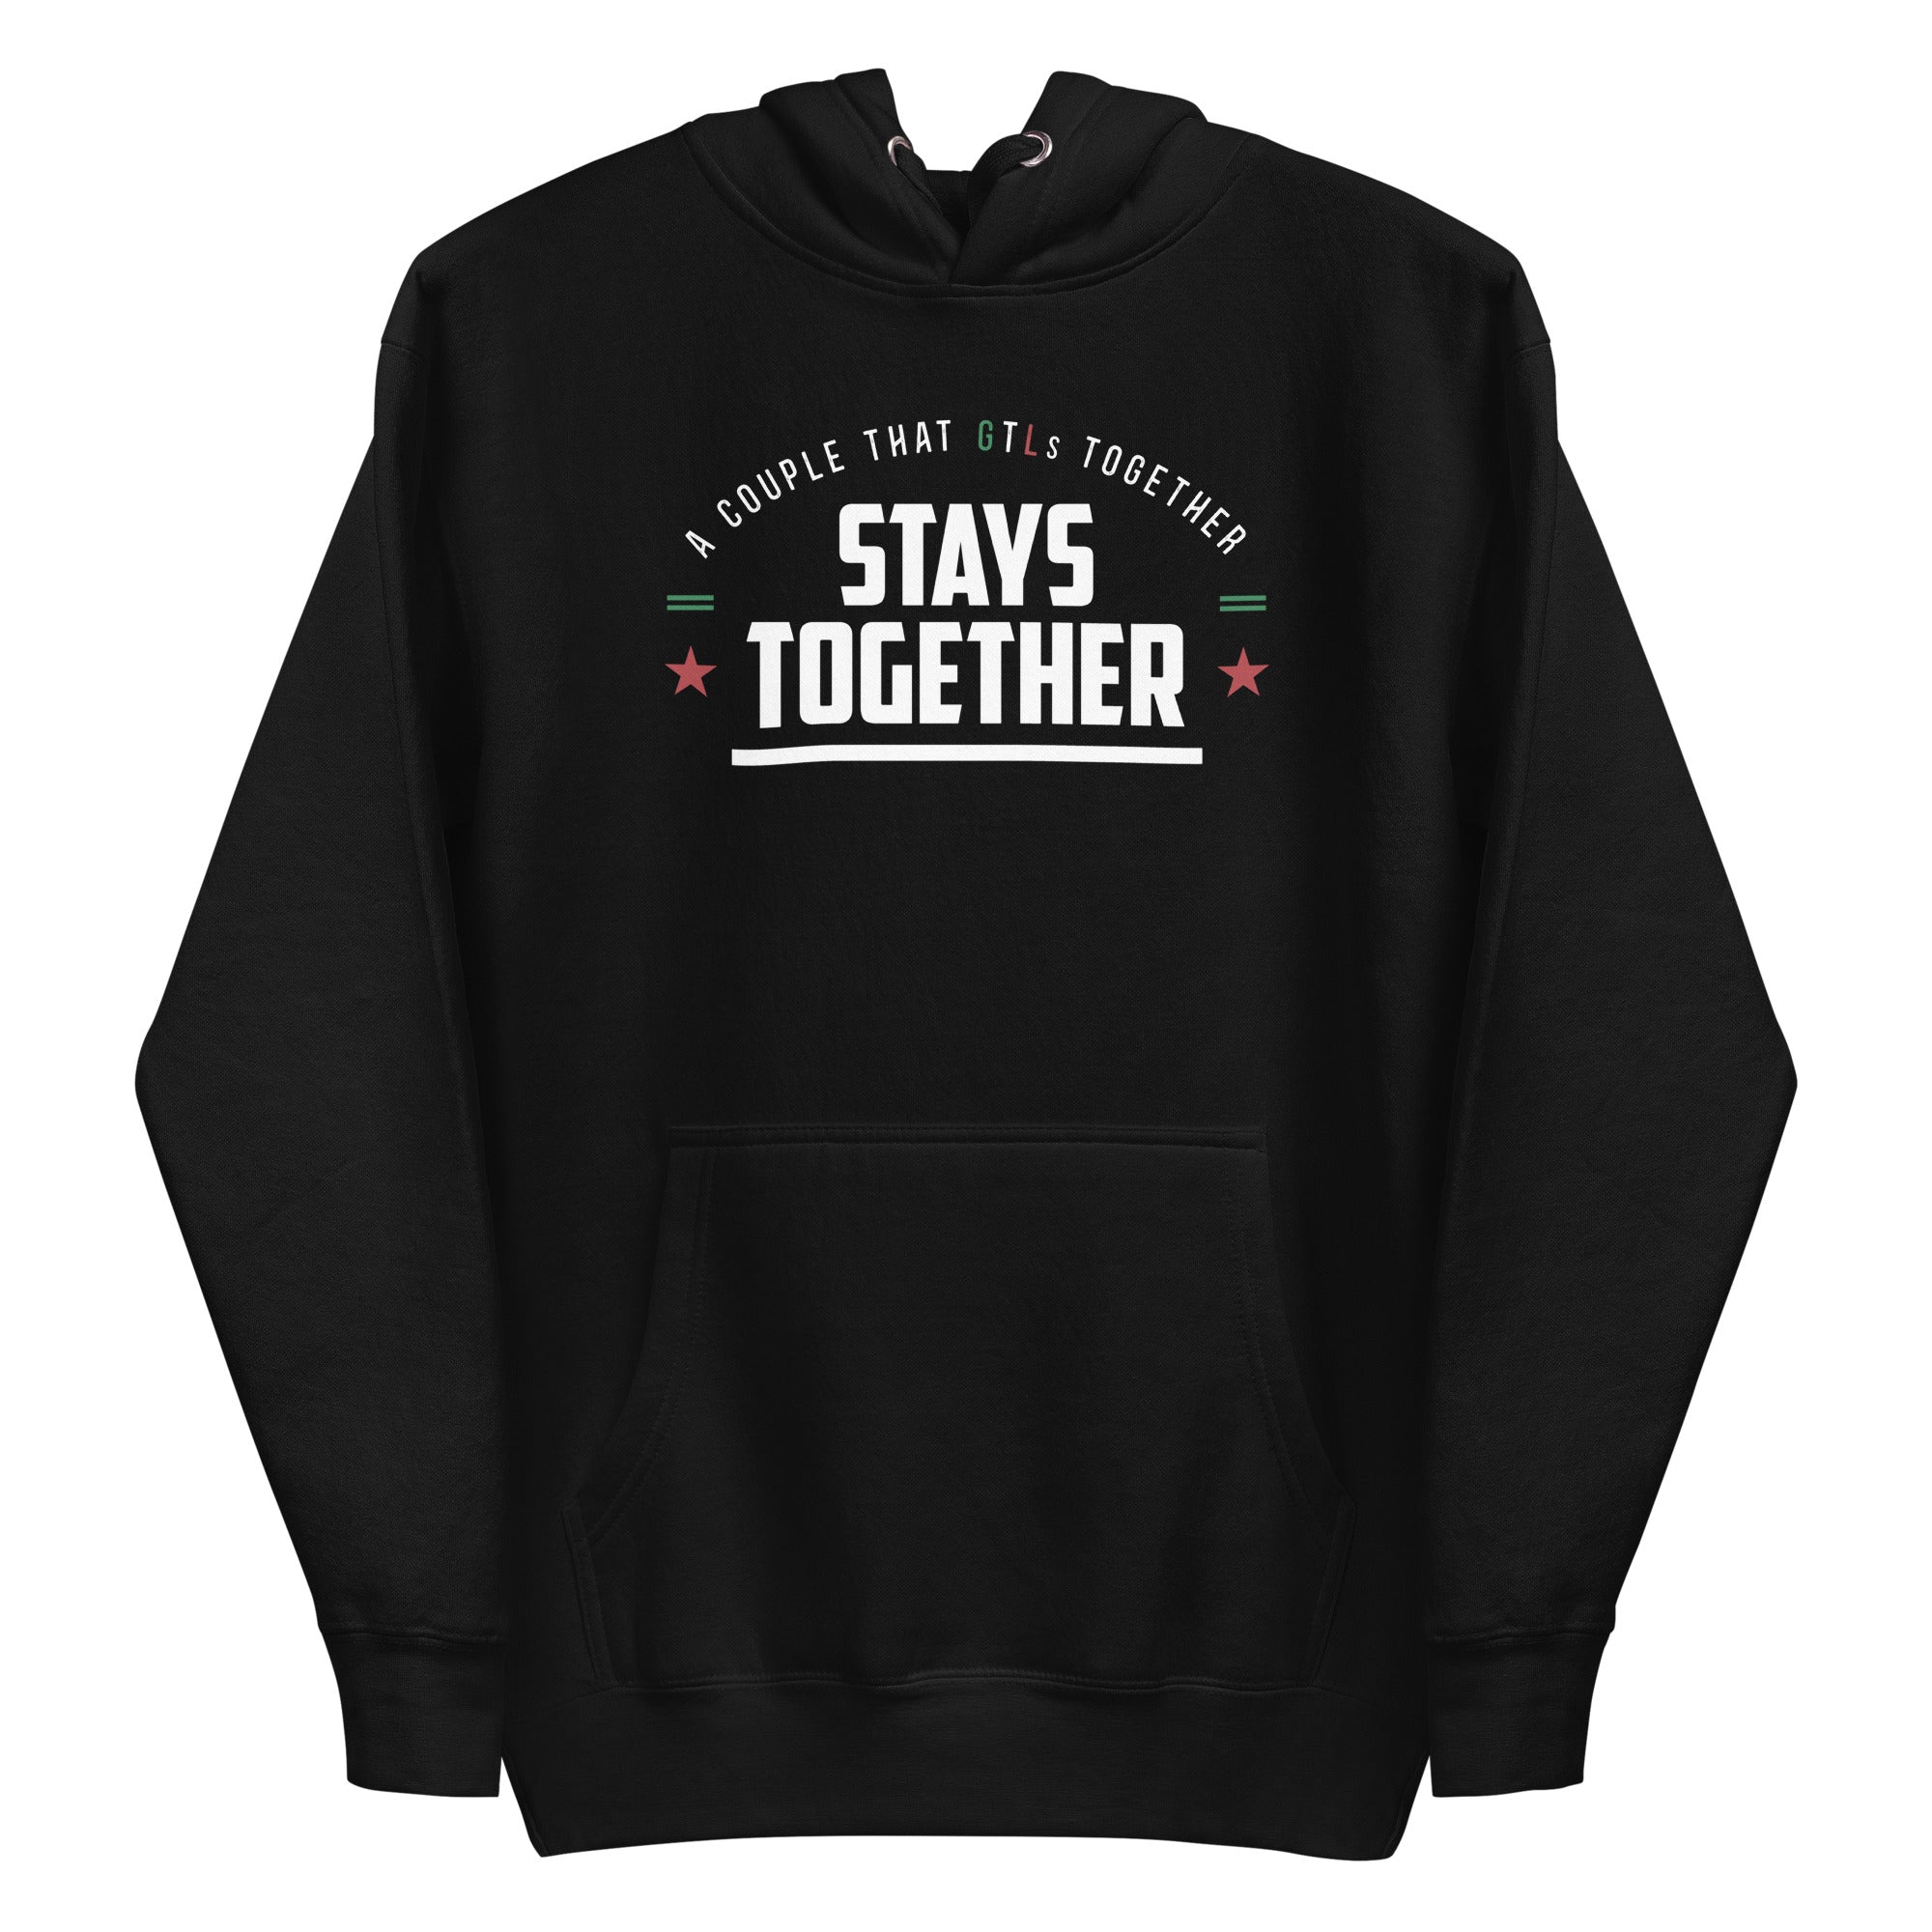 Mike Sorrentino Couple GTL Together Hoodie